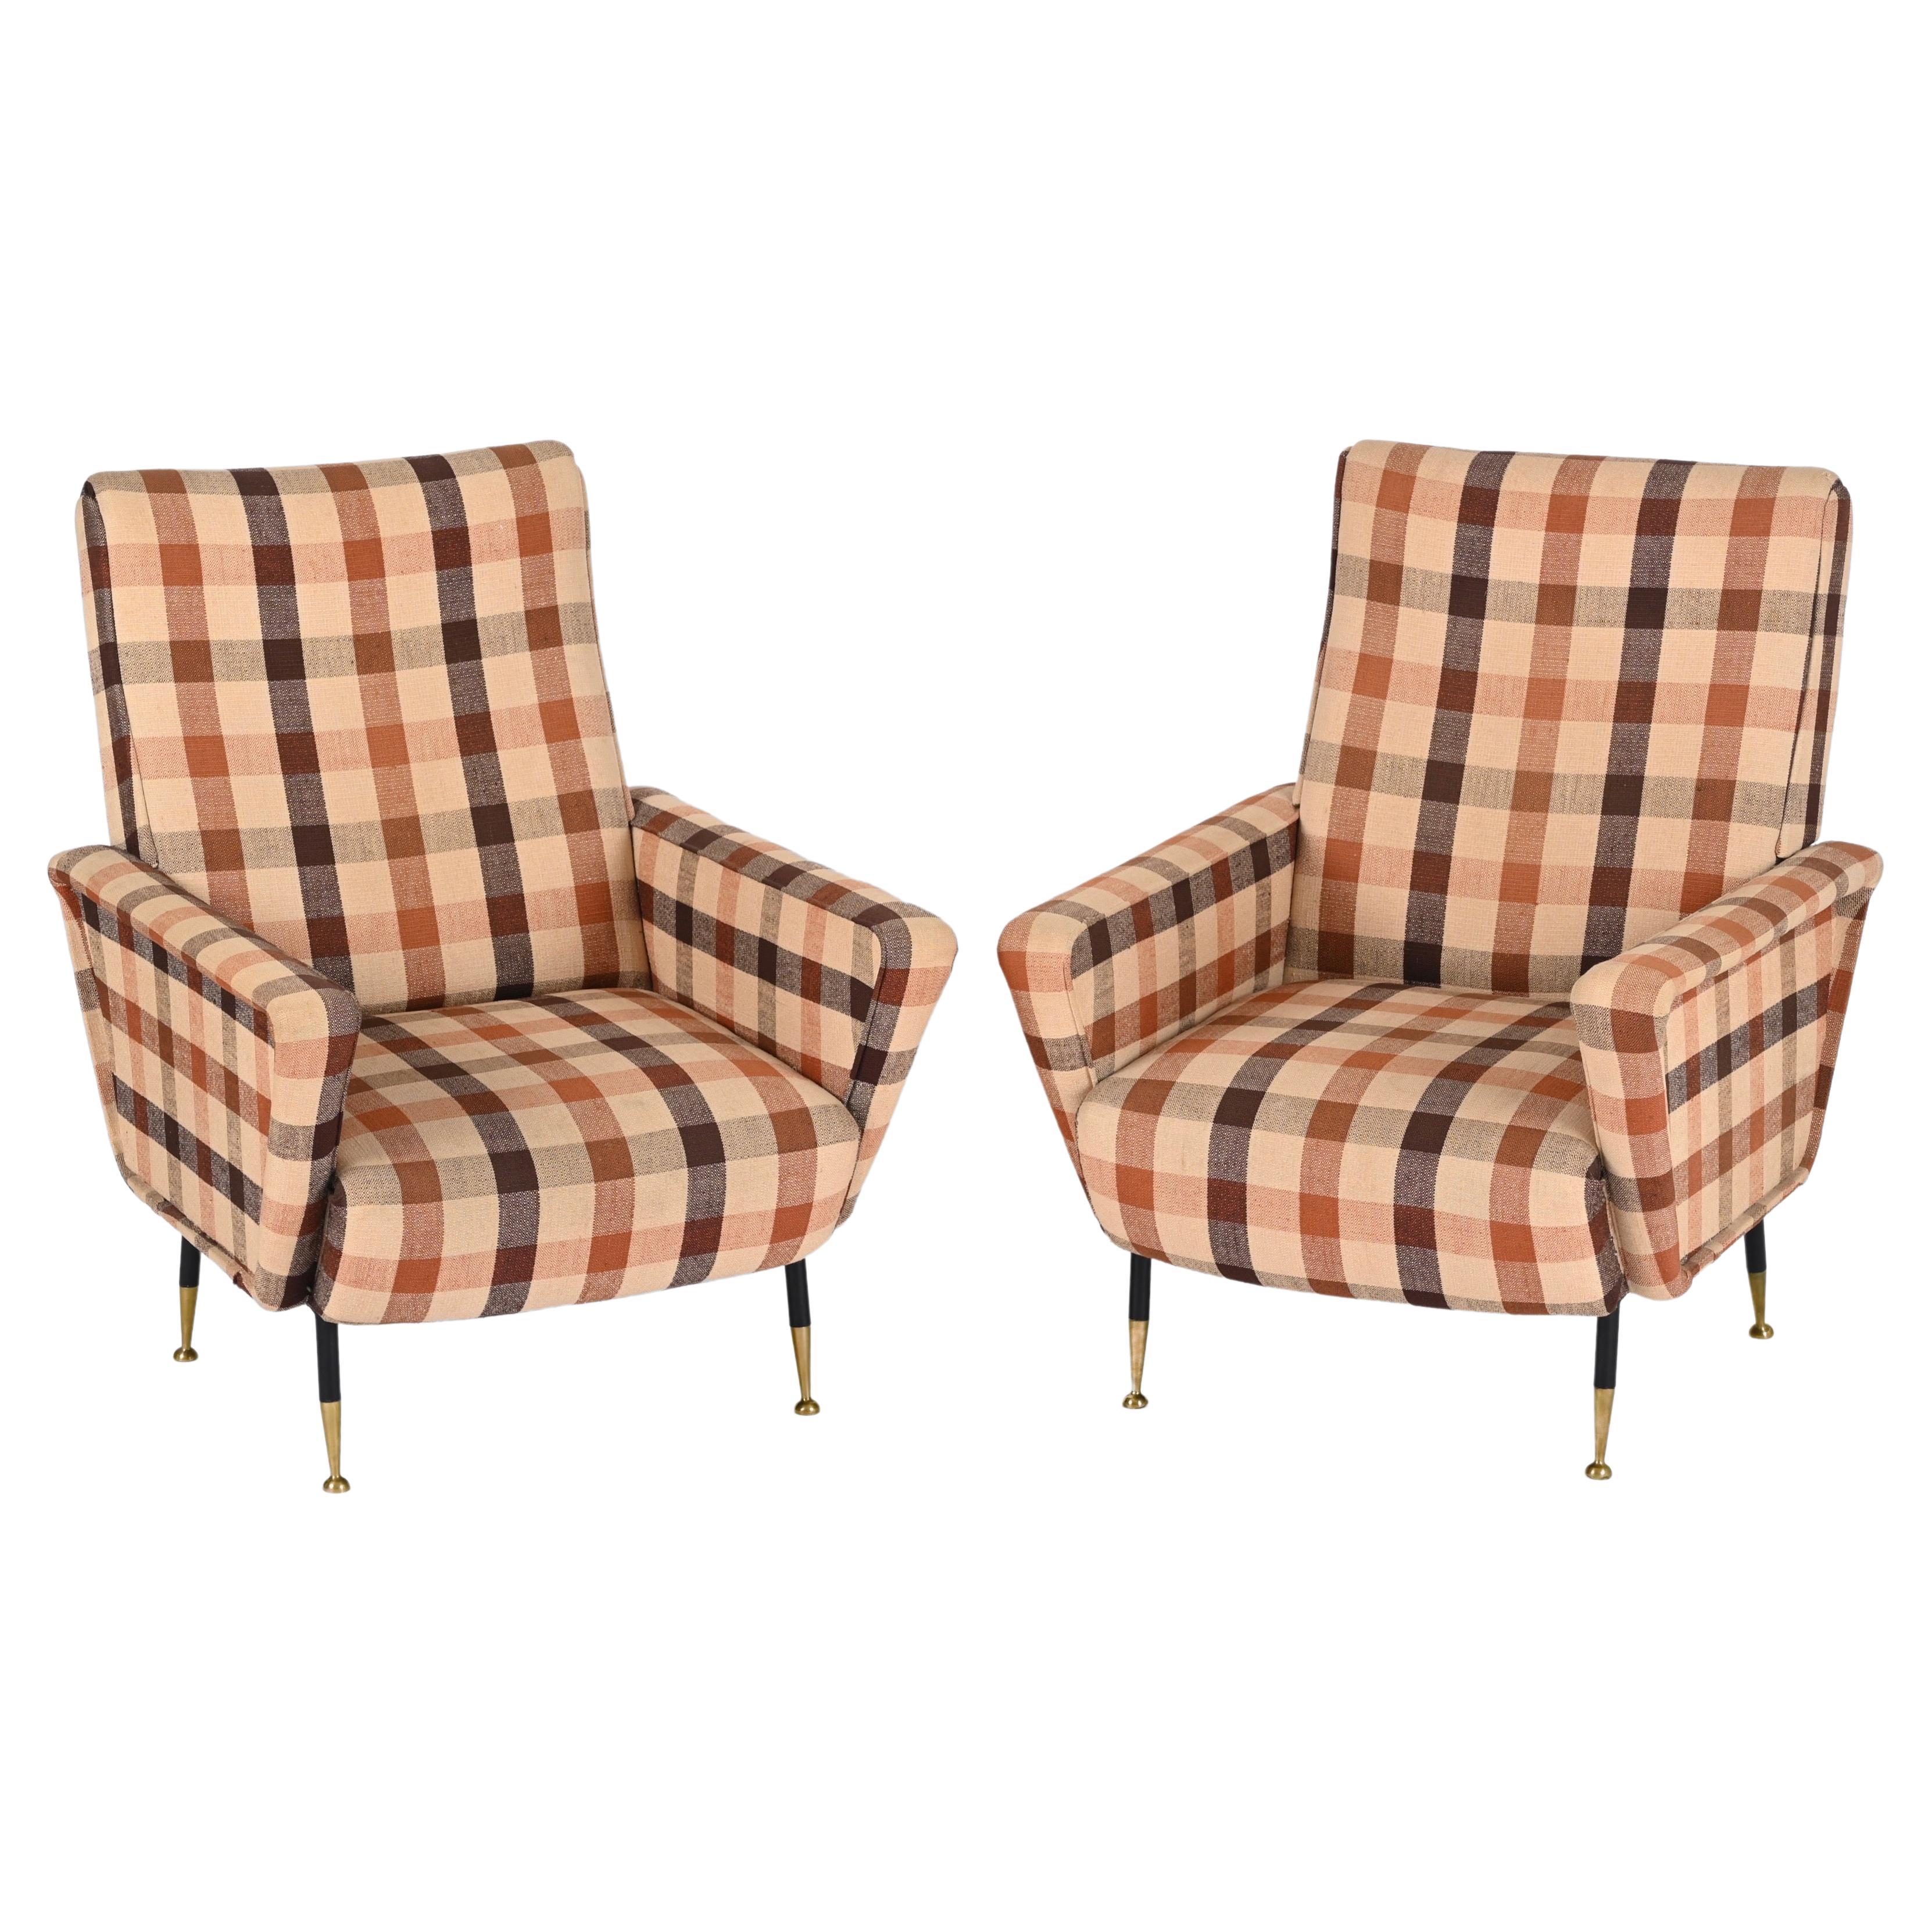 Marco Zanuso Pair of Armchairs, Check Fabric, Brass and Metal, Italy 1950s For Sale